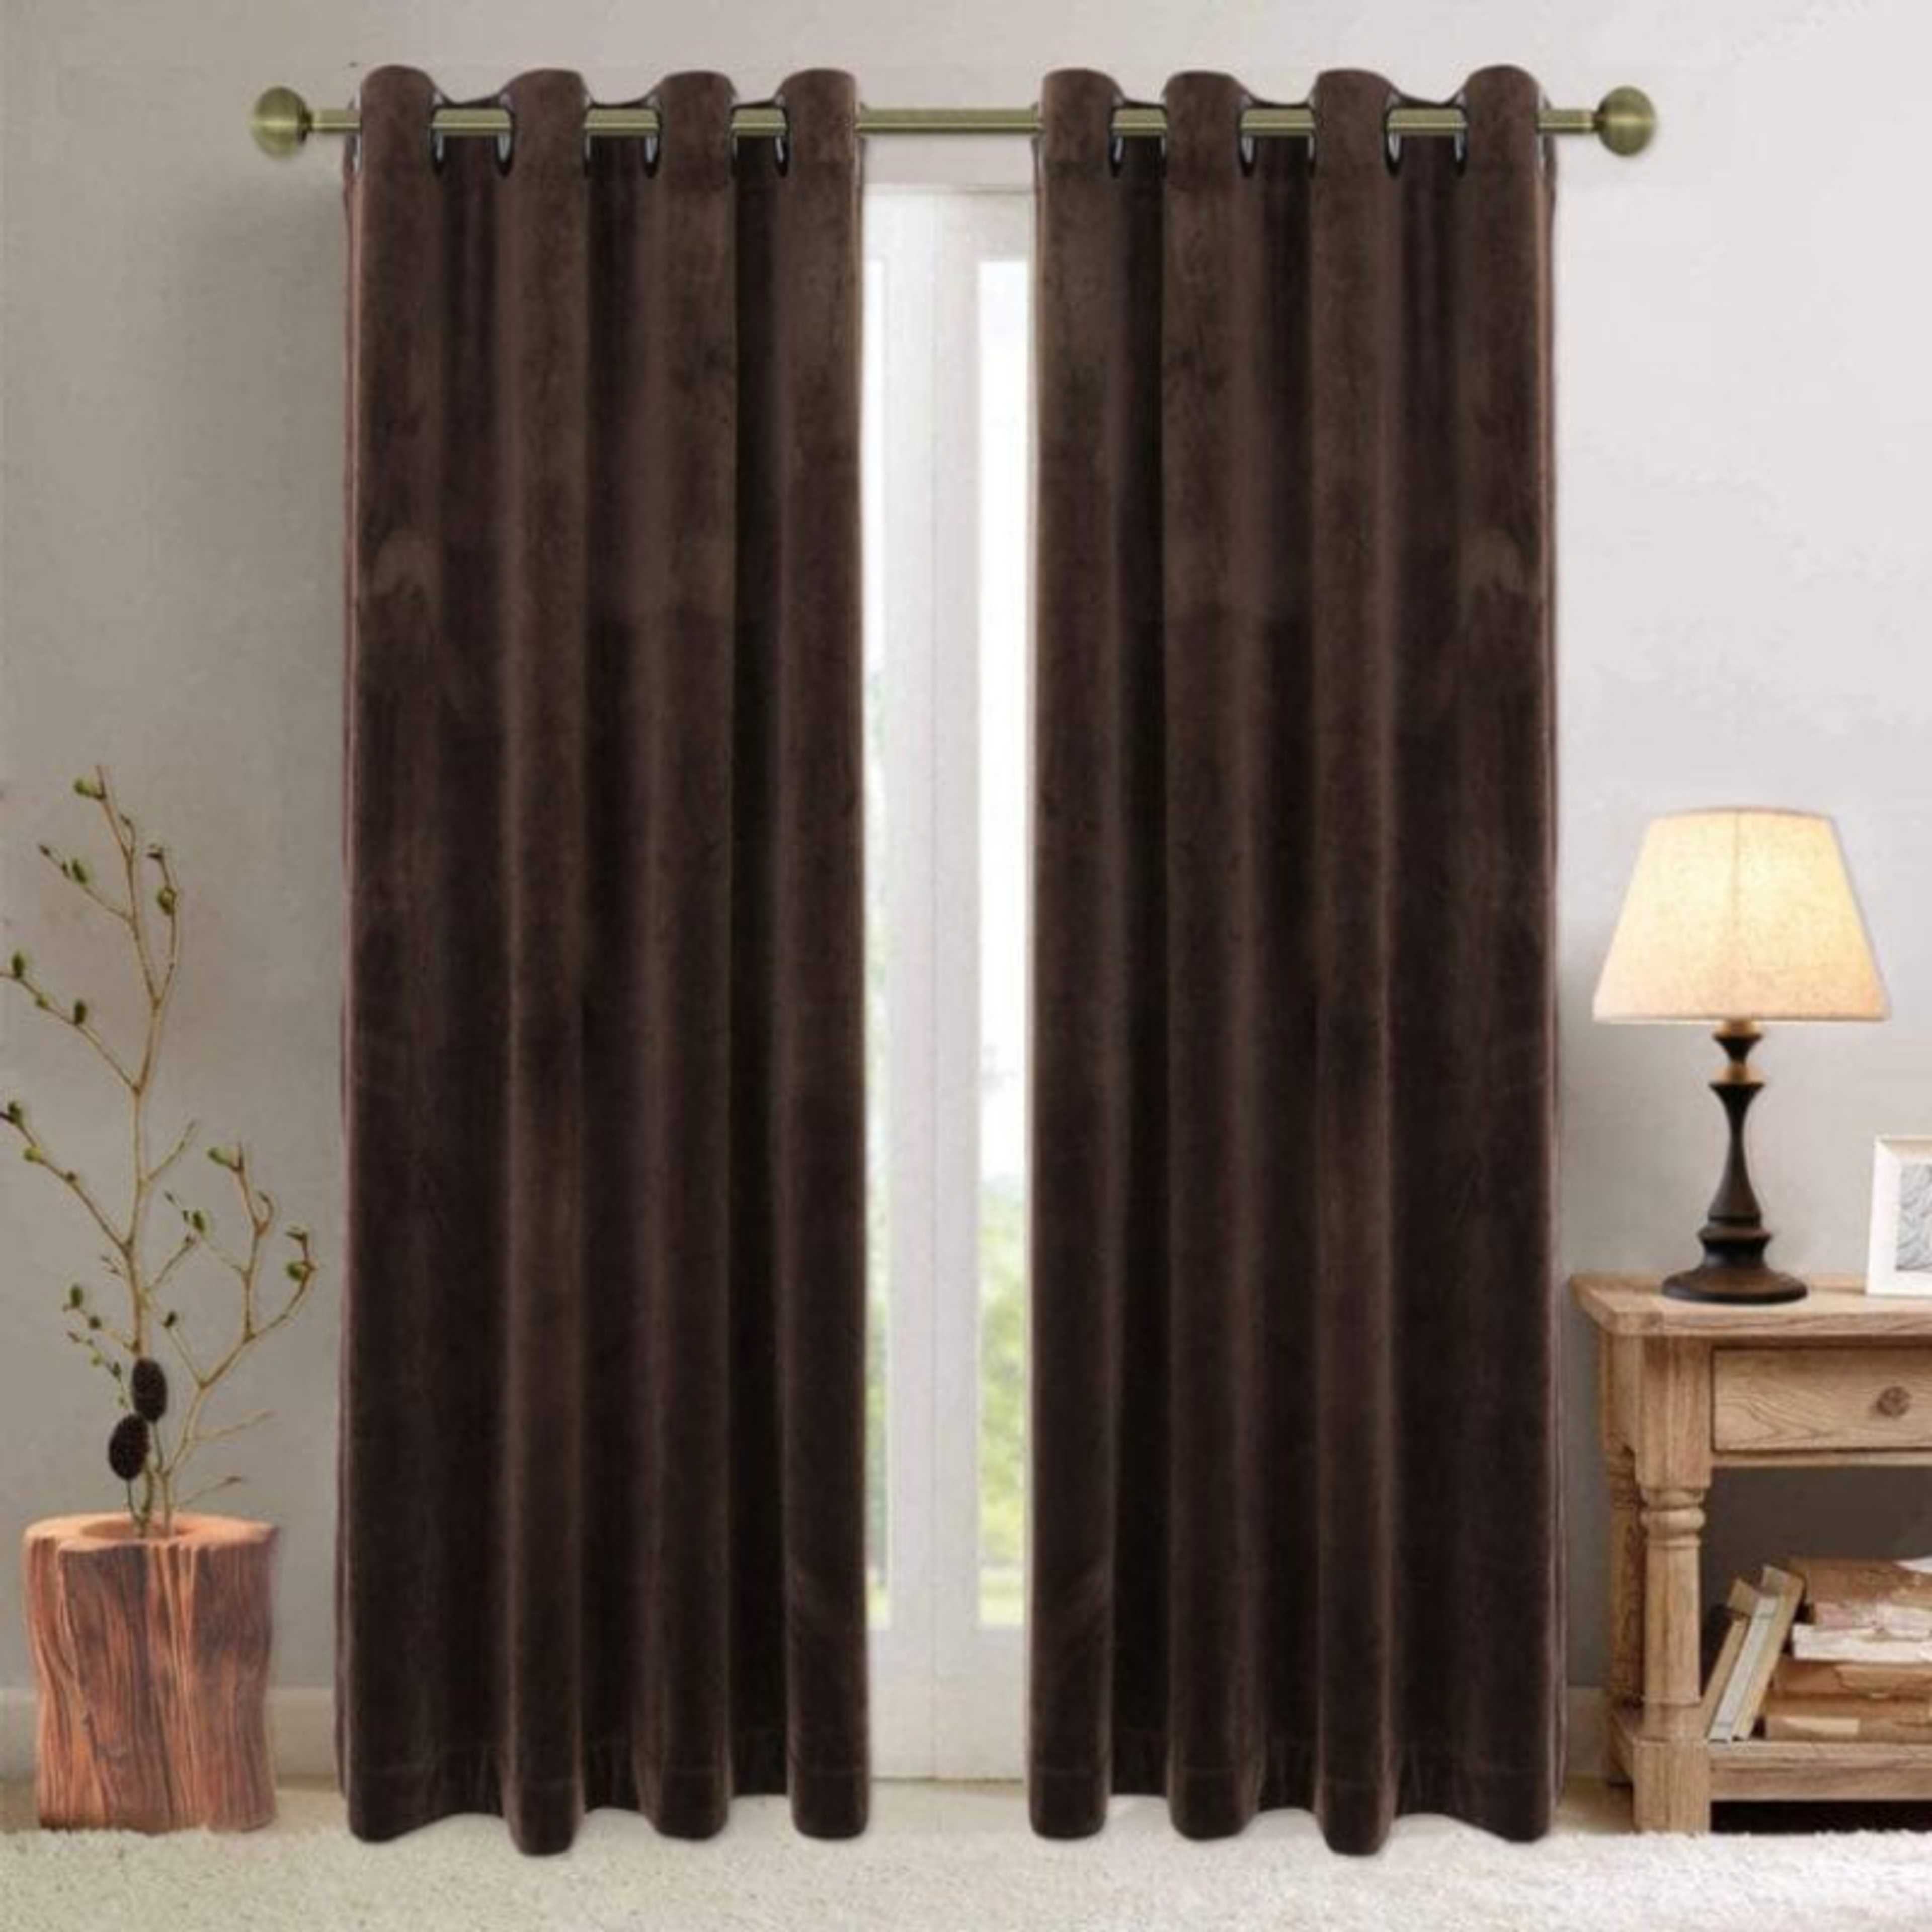 Luxury Plain Velvet Eyelet Curtains With linning - Chocolate brown